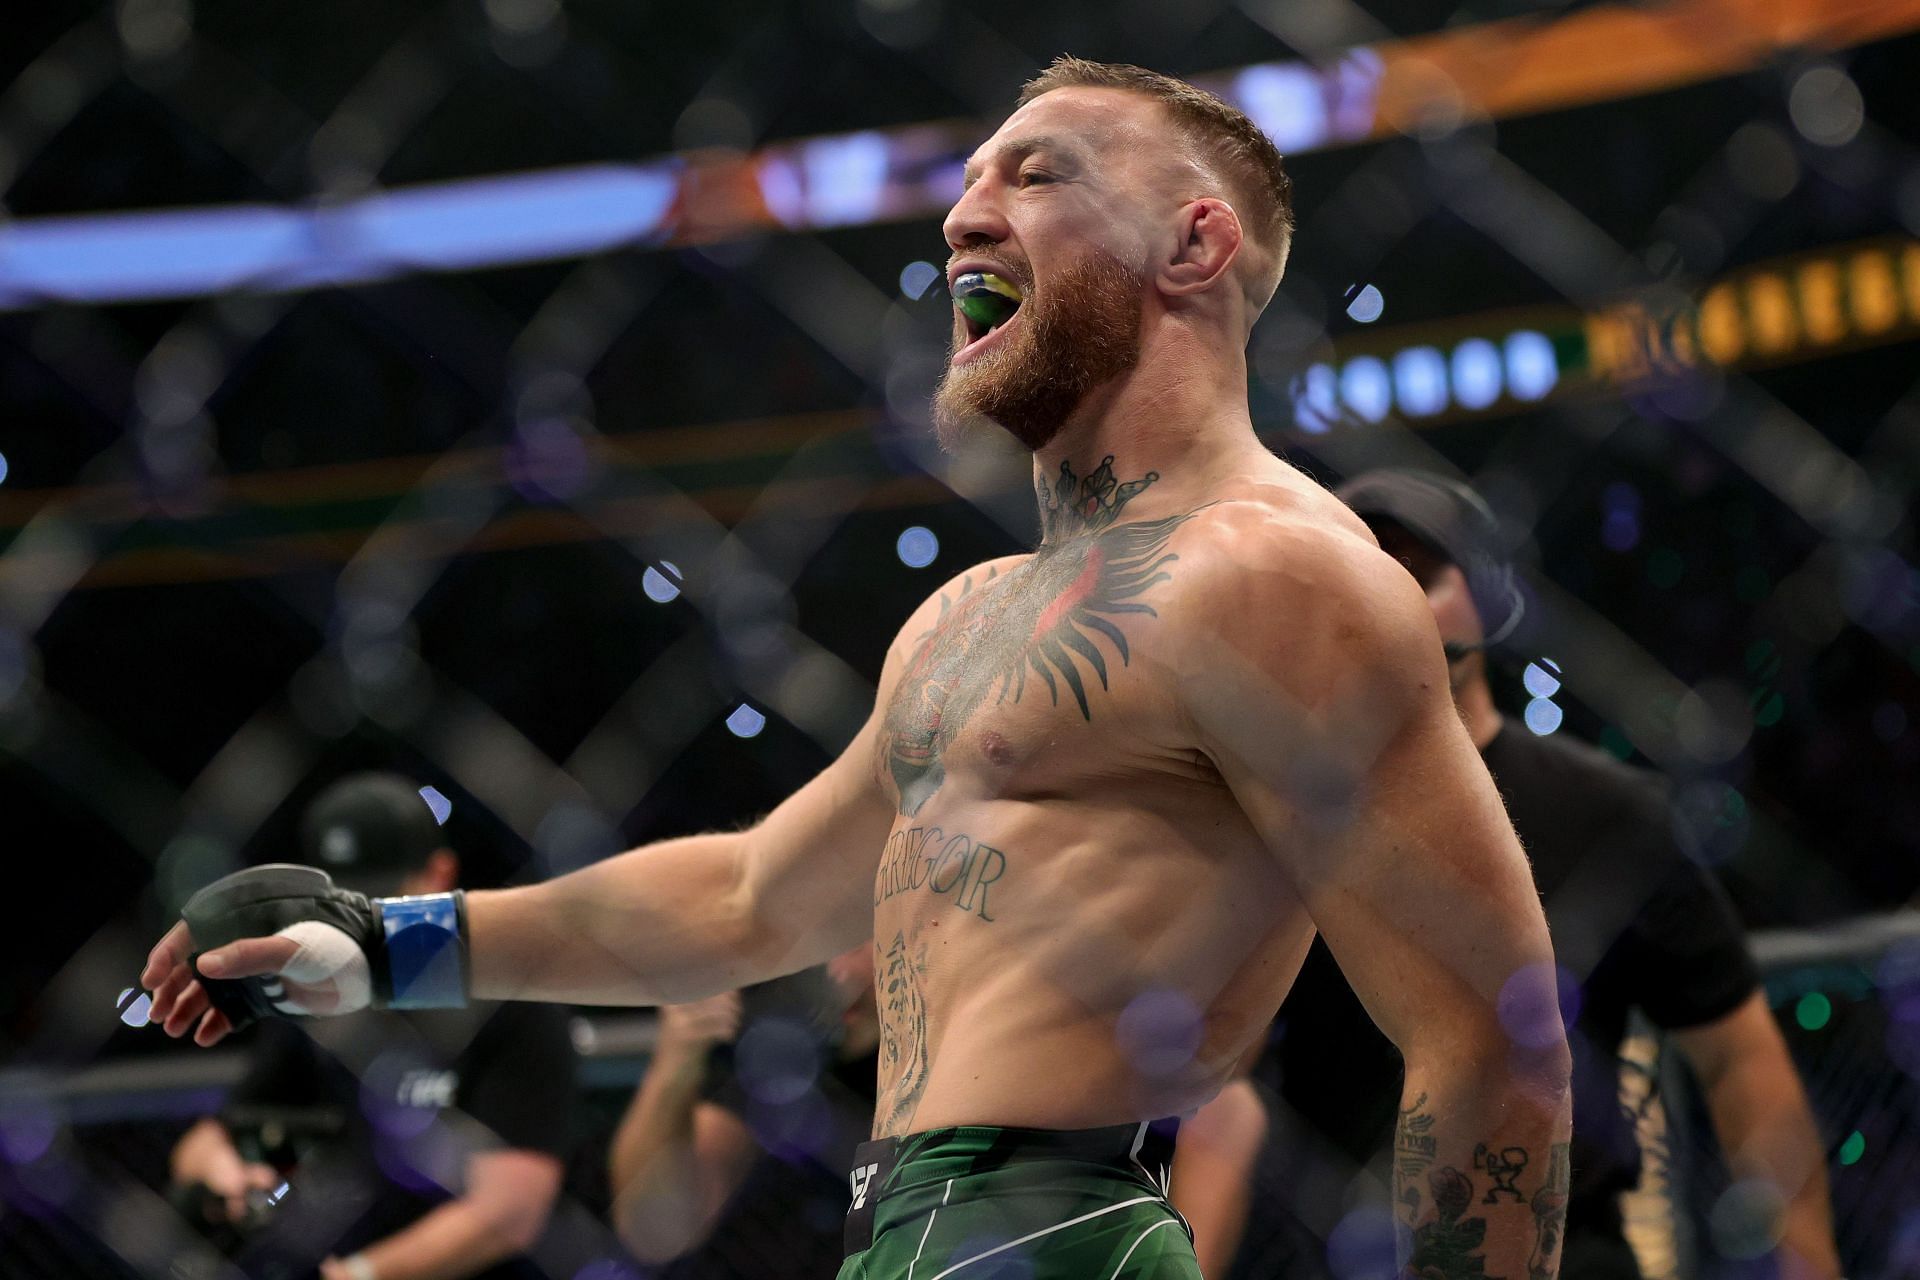 McGregor was stripped of the lightweight title in 2018